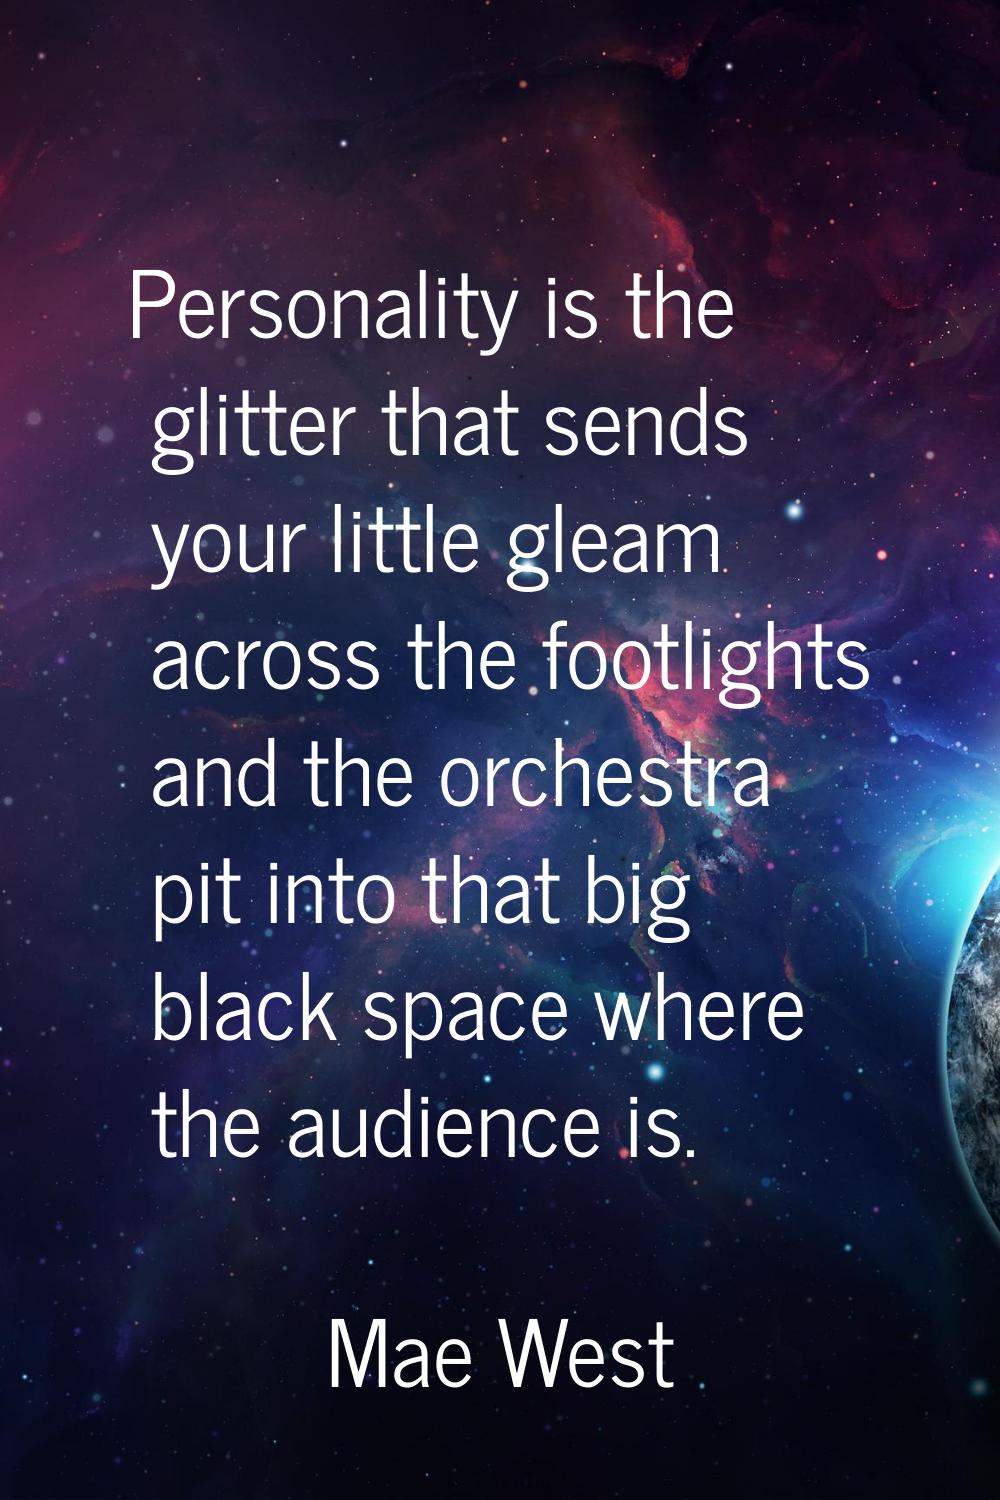 Personality is the glitter that sends your little gleam across the footlights and the orchestra pit